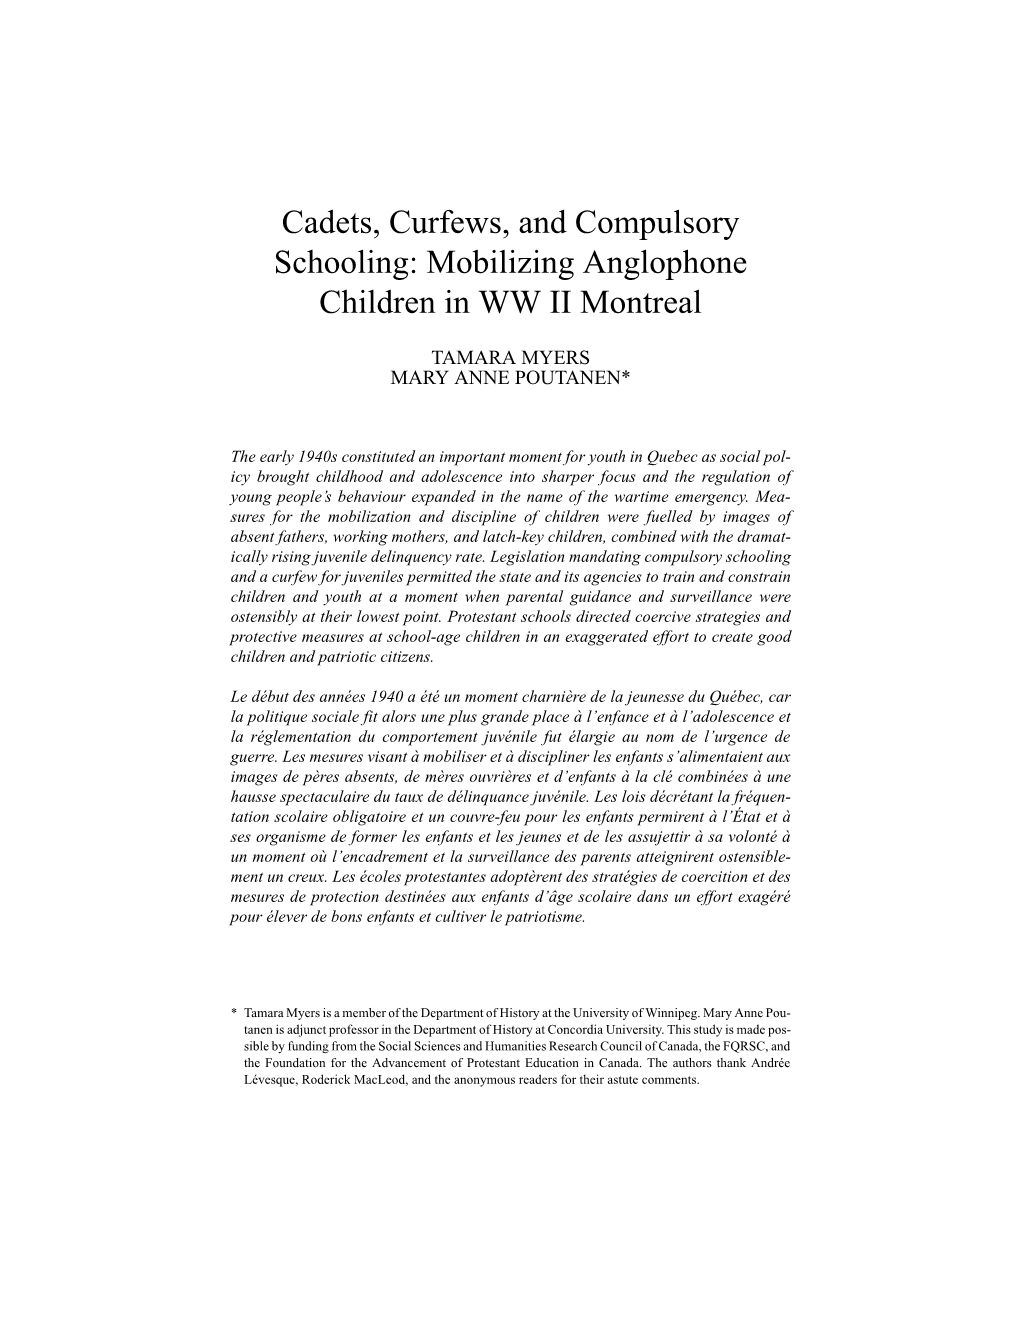 Cadets, Curfews, and Compulsory Schooling: Mobilizing Anglophone Children in WW II Montreal